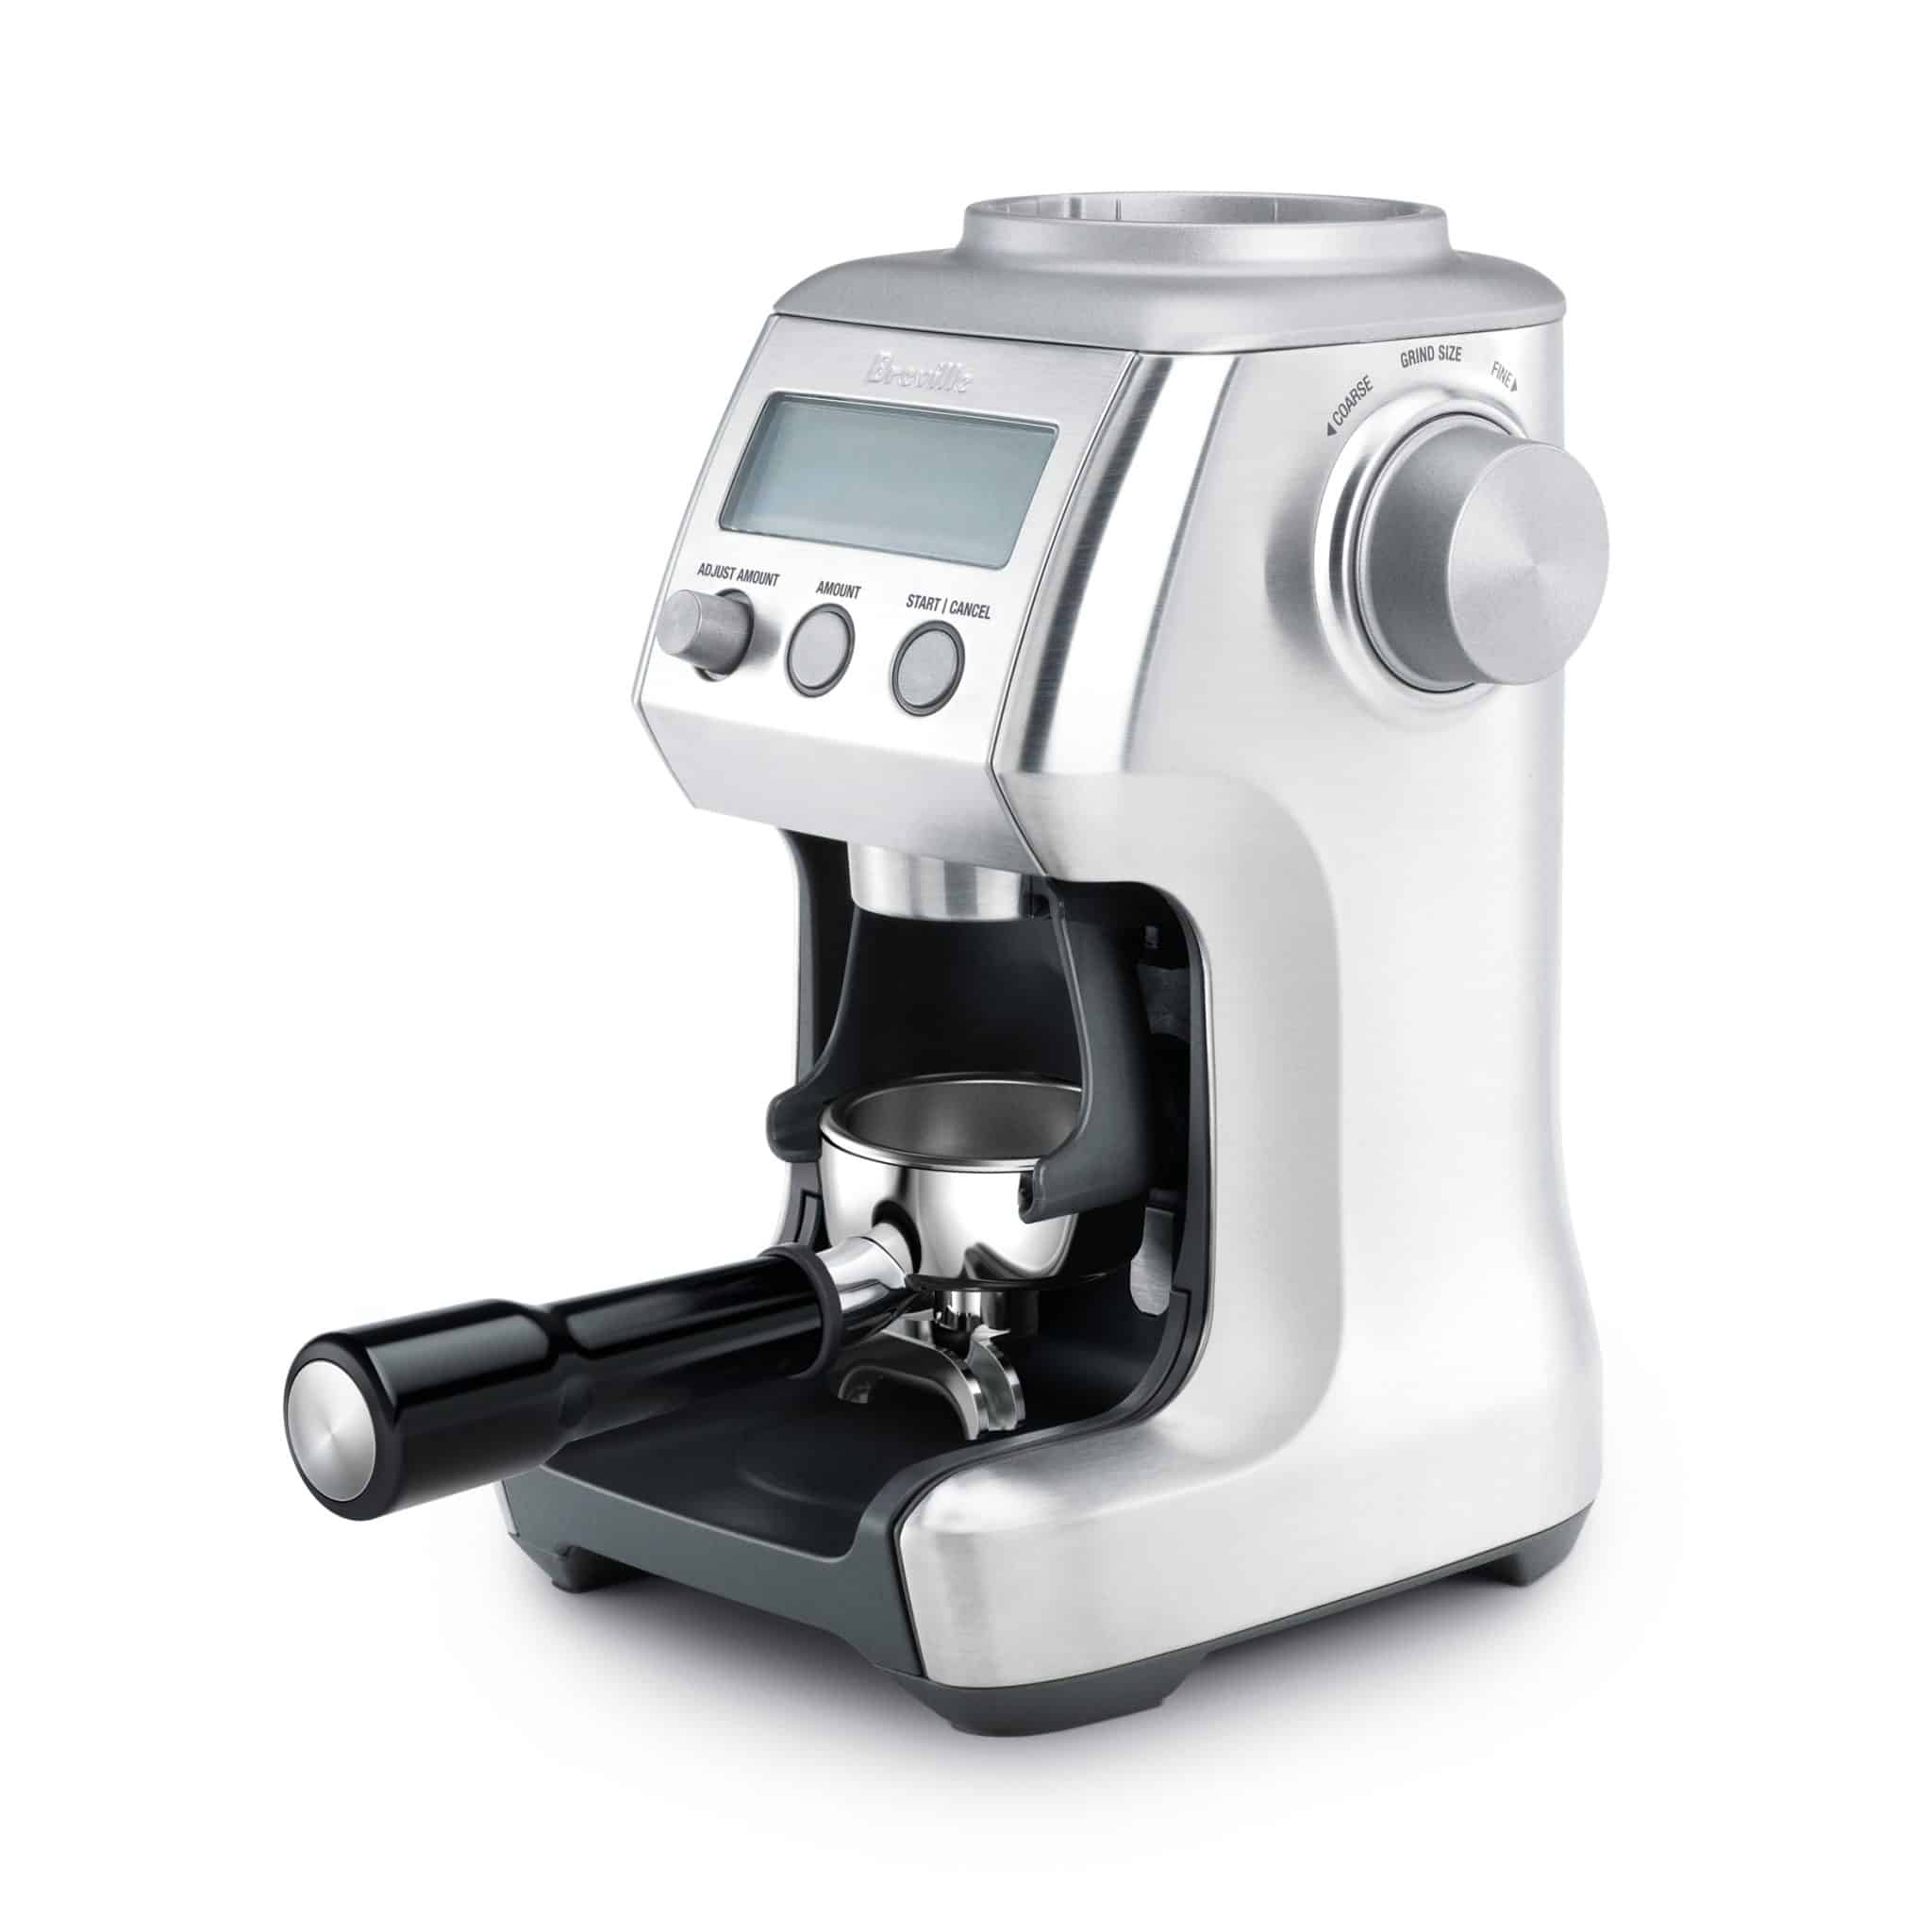 May-xay-cafe-breville-bcg820-03